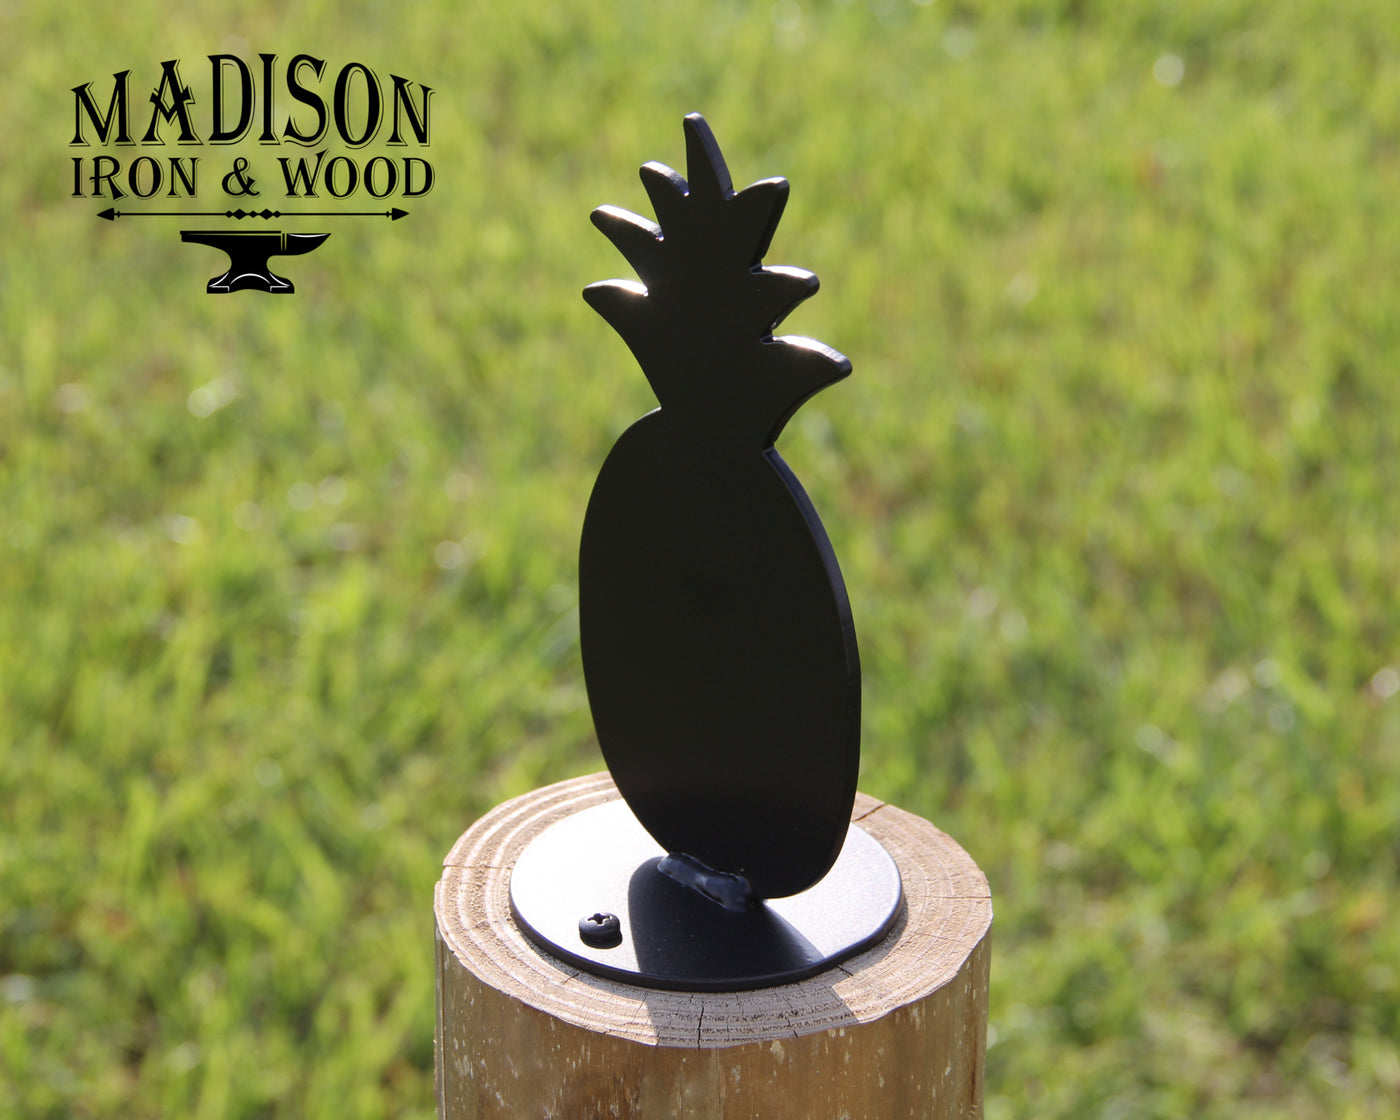 Pineapple Post Top For Round Wood Fence Post - Madison Iron and Wood - Post Cap - metal outdoor decor - Steel deocrations - american made products - veteran owned business products - fencing decorations - fencing supplies - custom wall decorations - personalized wall signs - steel - decorative post caps - steel post caps - metal post caps - brackets - structural brackets - home improvement - easter - easter decorations - easter gift - easter yard decor